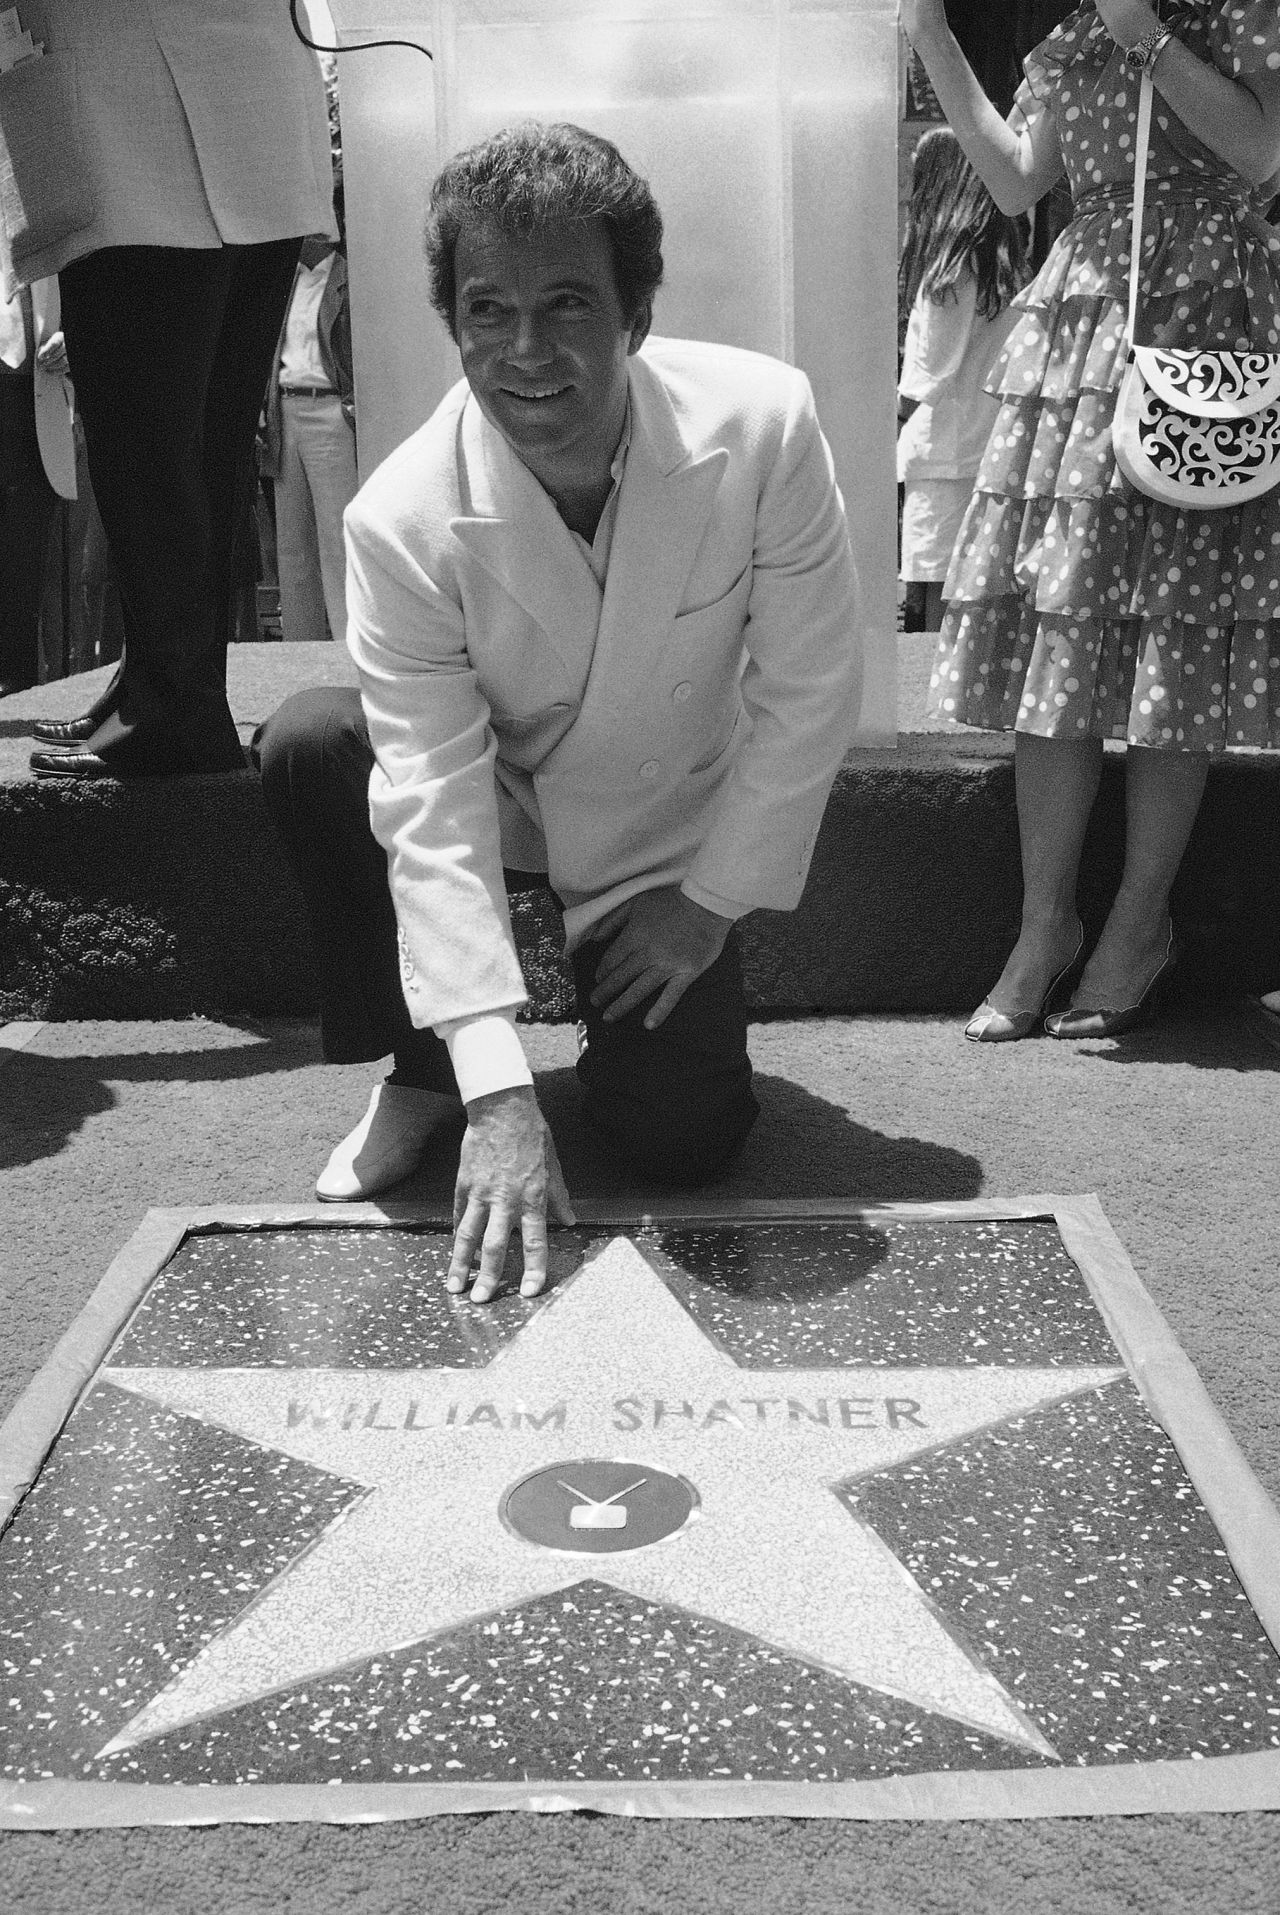 Shatner received a star on the Hollywood Walk of Fame in 1983.